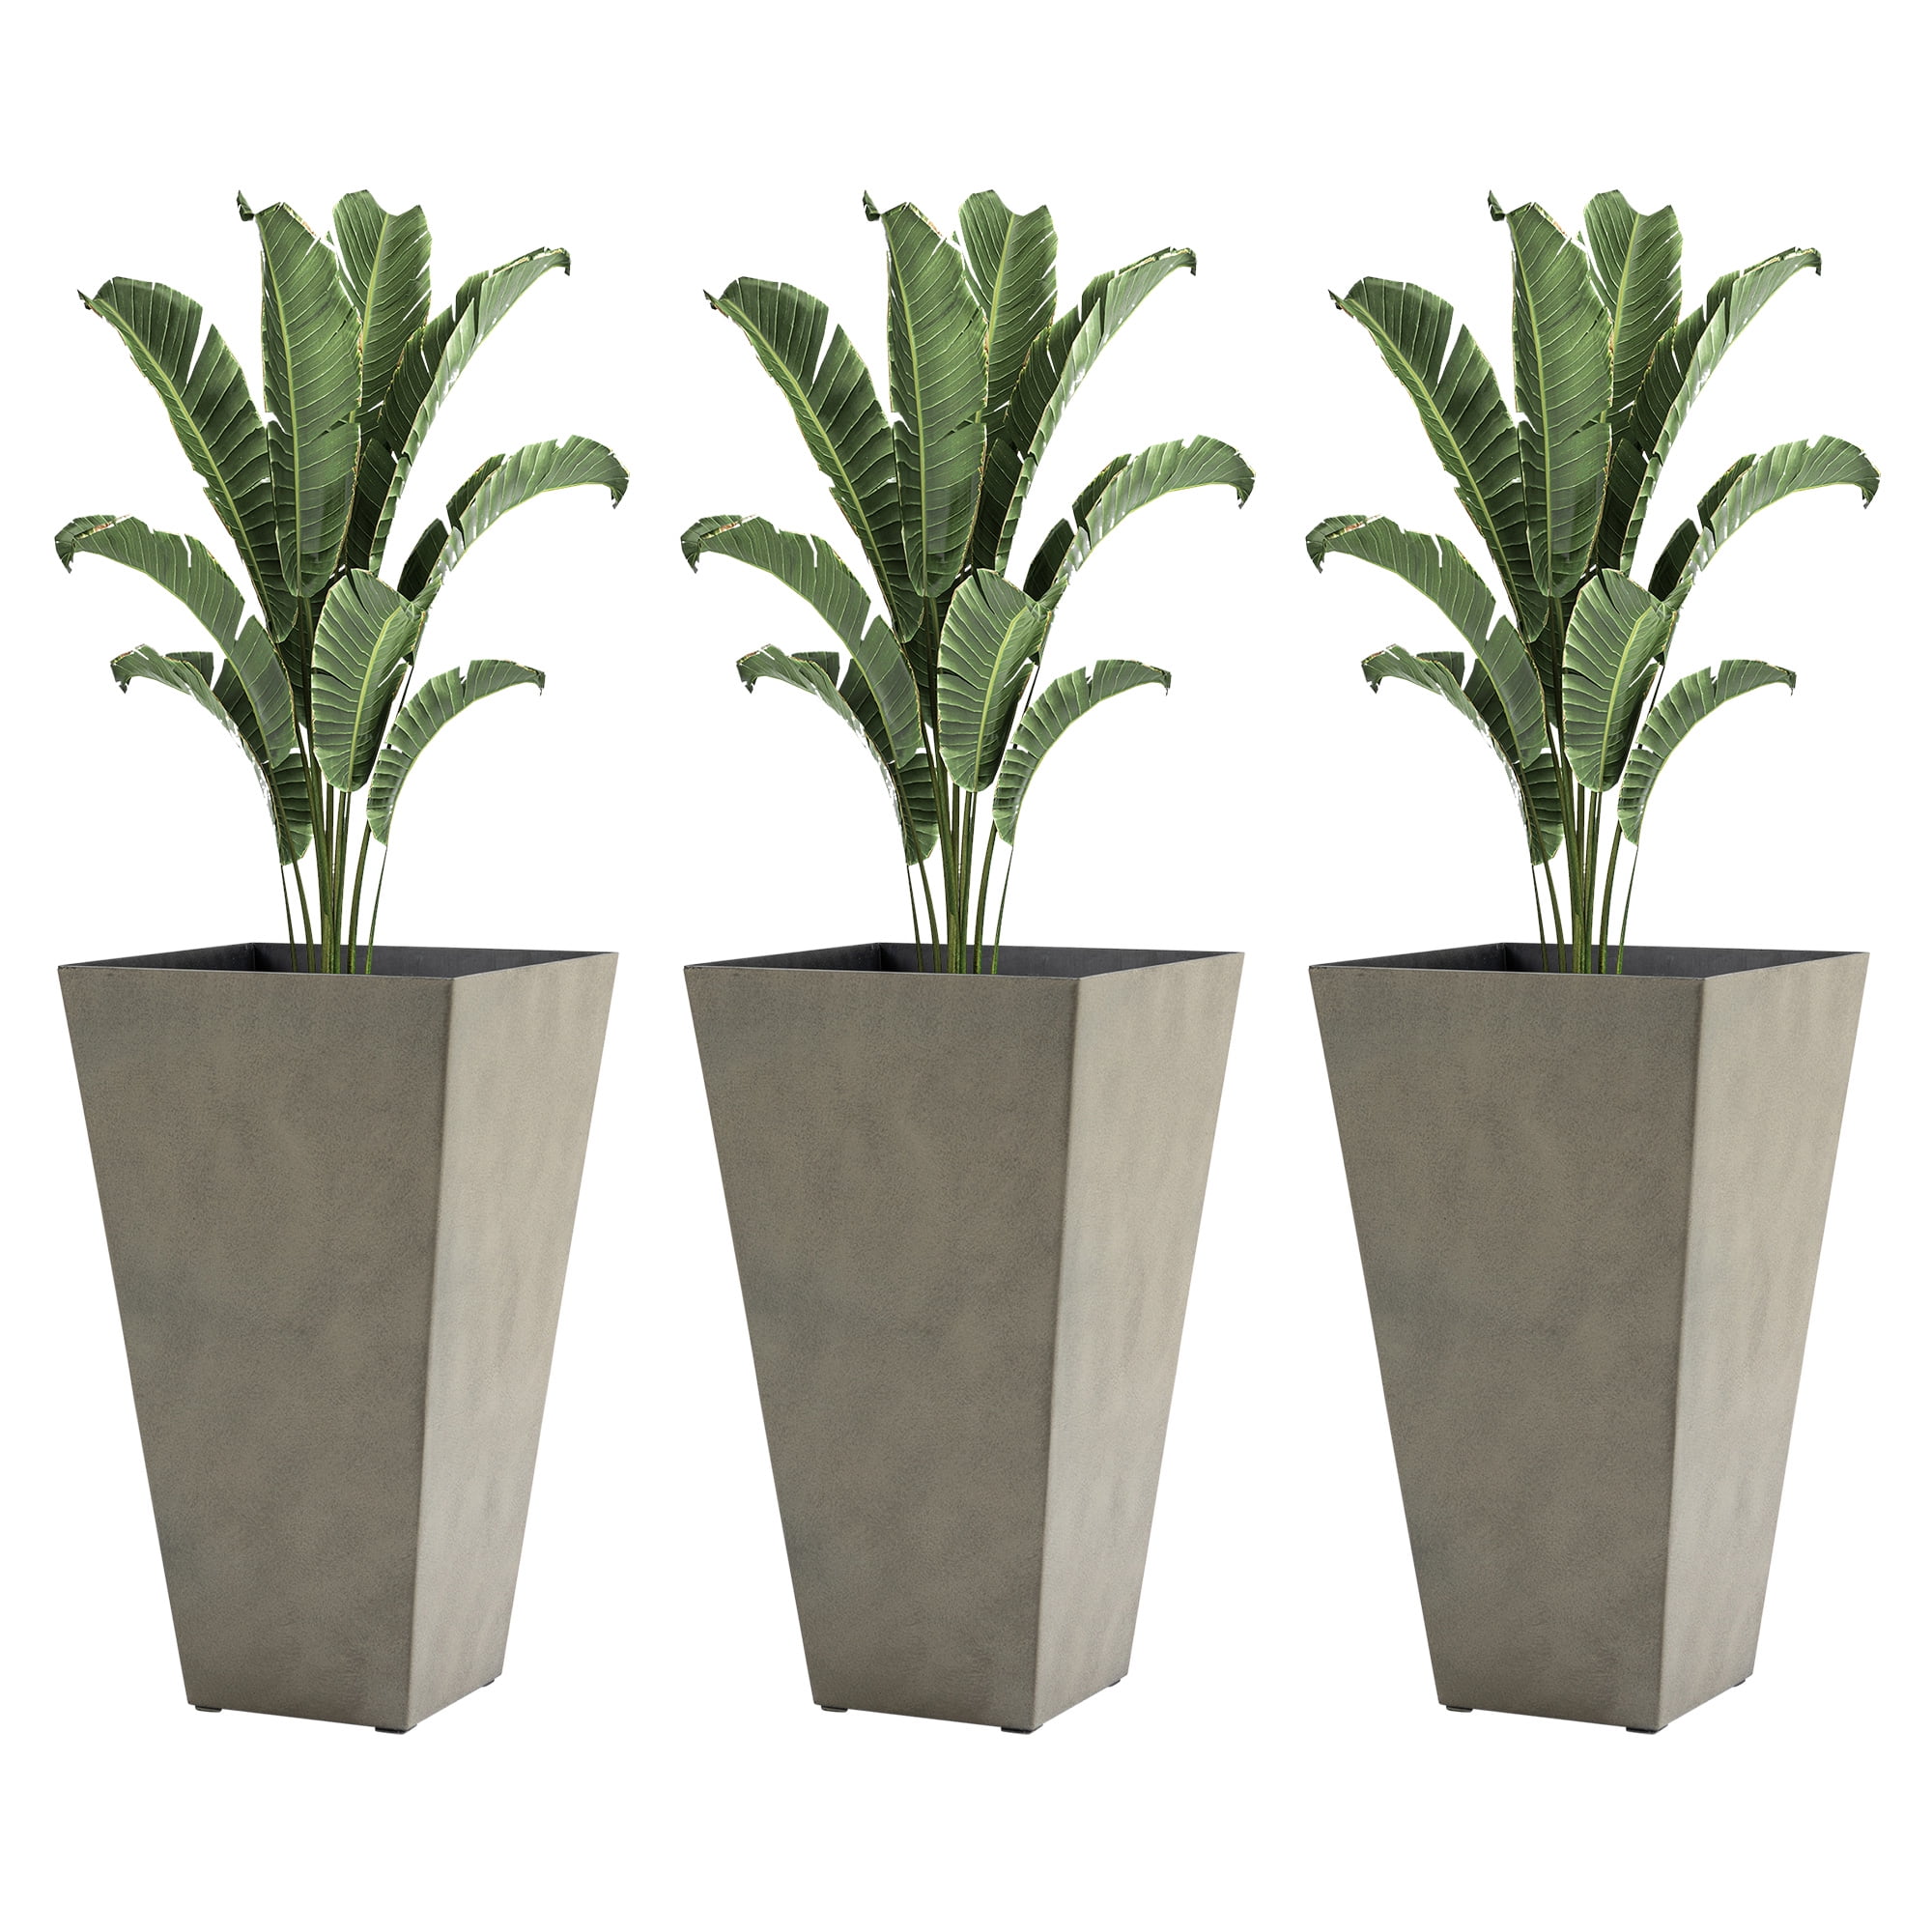 Outsunny 28" Tall Plastic Flower Pot, Set of 3, Large Outdoor & Indoor - image 1 of 9